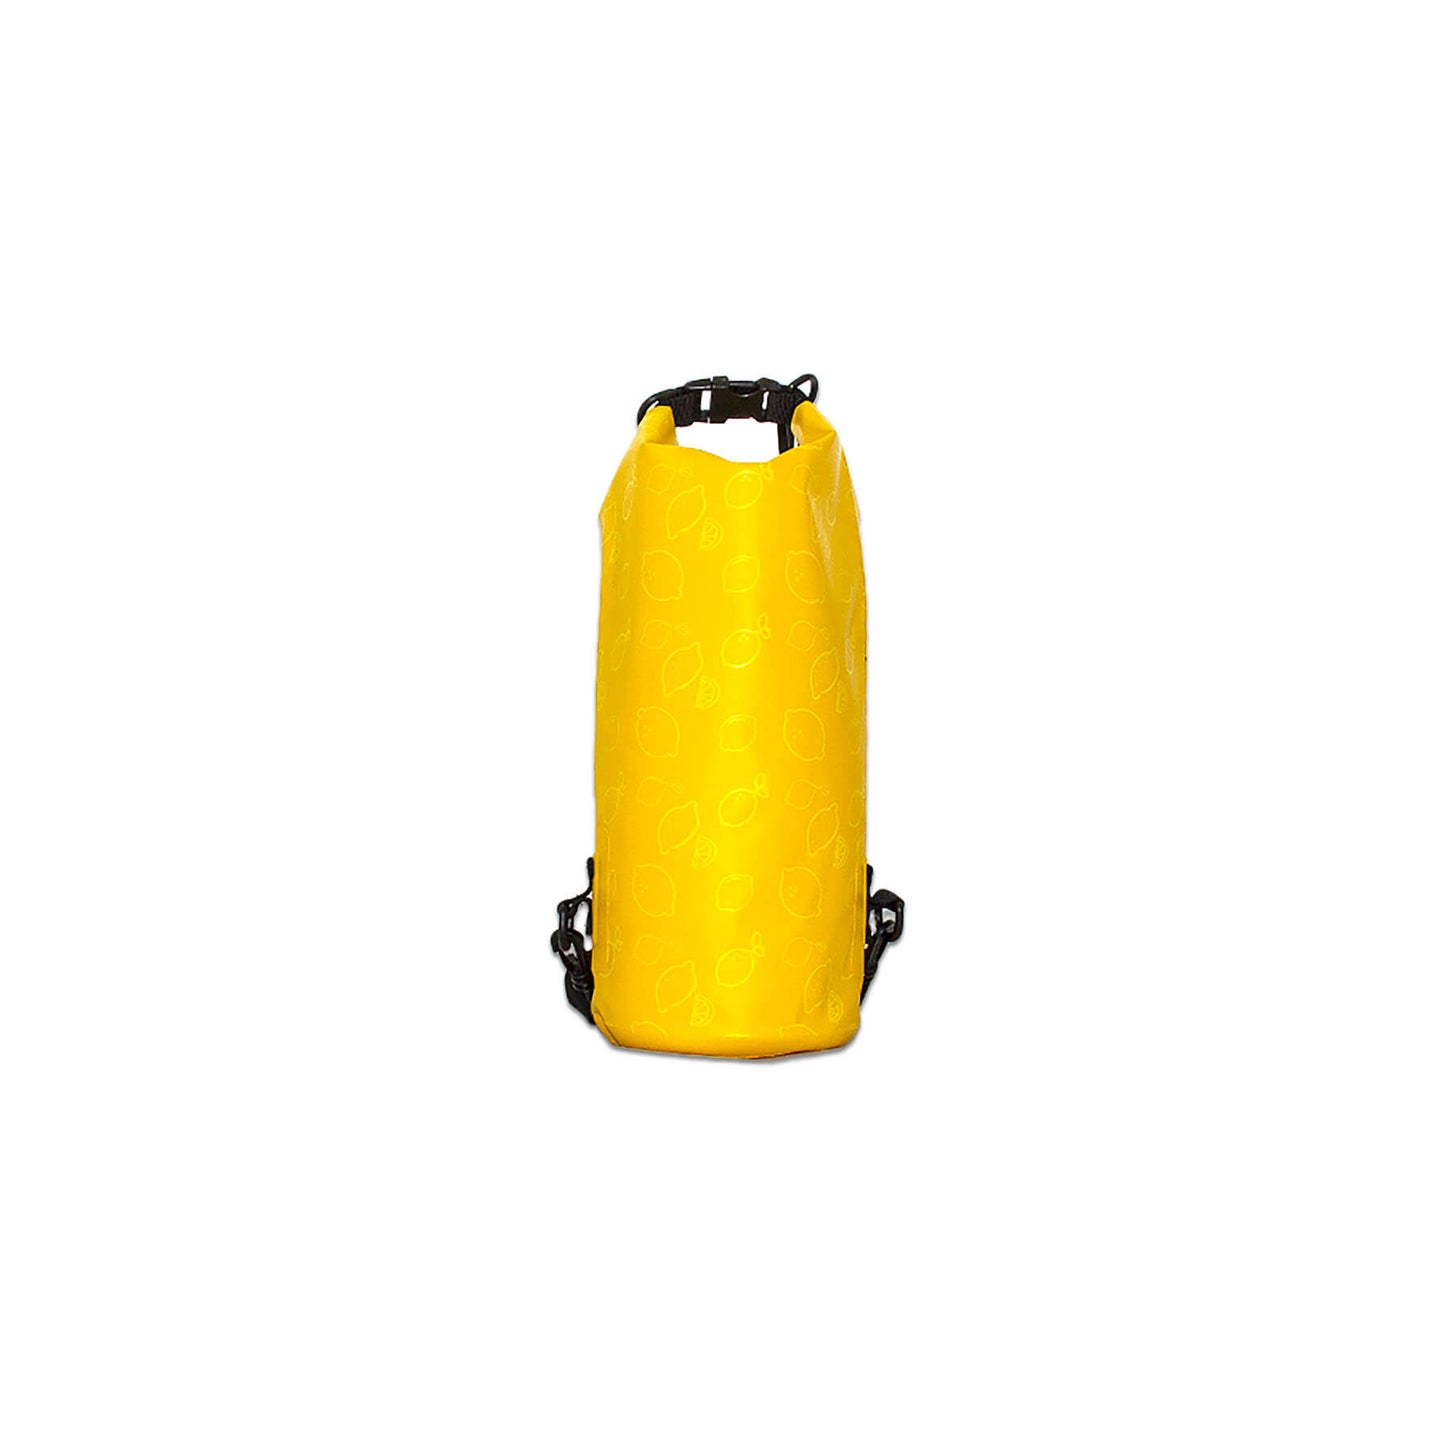 waterproof dry bag 5 litres a handy grab size with detachable straps and carabiner  lemonade front view